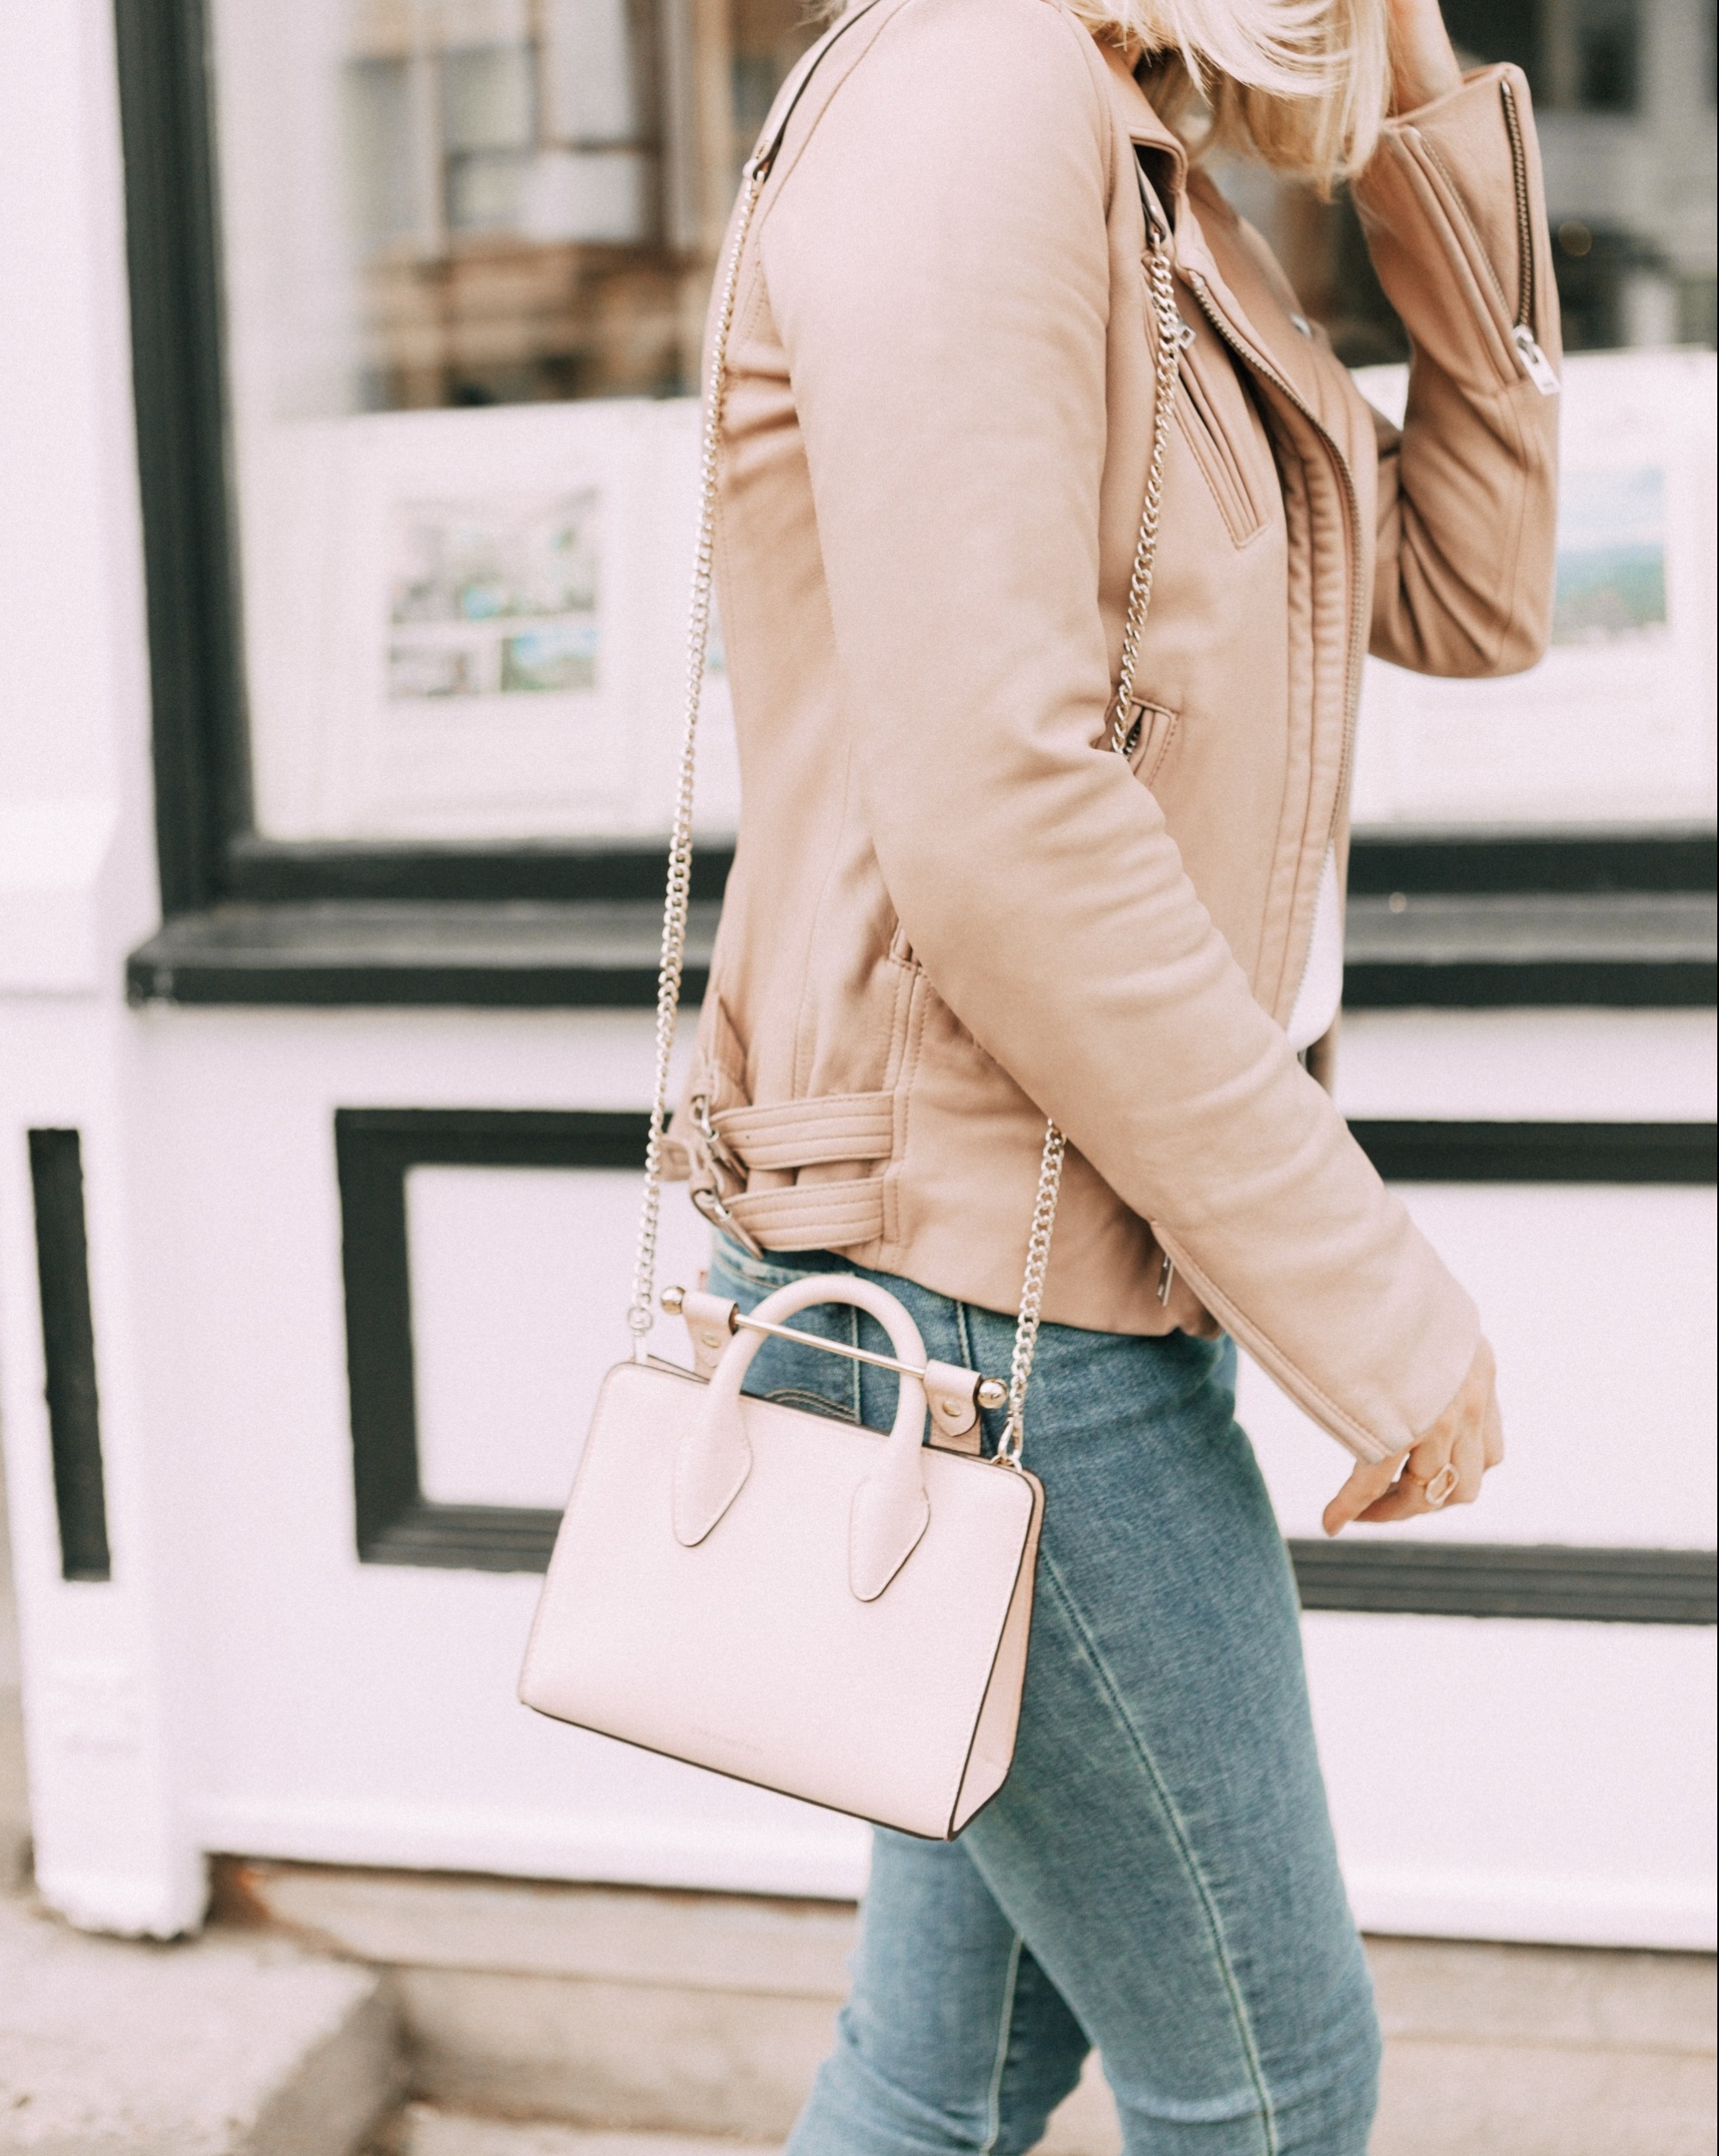 Hot Handbags, Fashion blogger Erin Busbee of BusbeeStyle.com wearing a pale pink Strathberry Nano Tote with a beige leather jacket by IRO, white lace cami, and Levi jeans in Telluride, Colorado